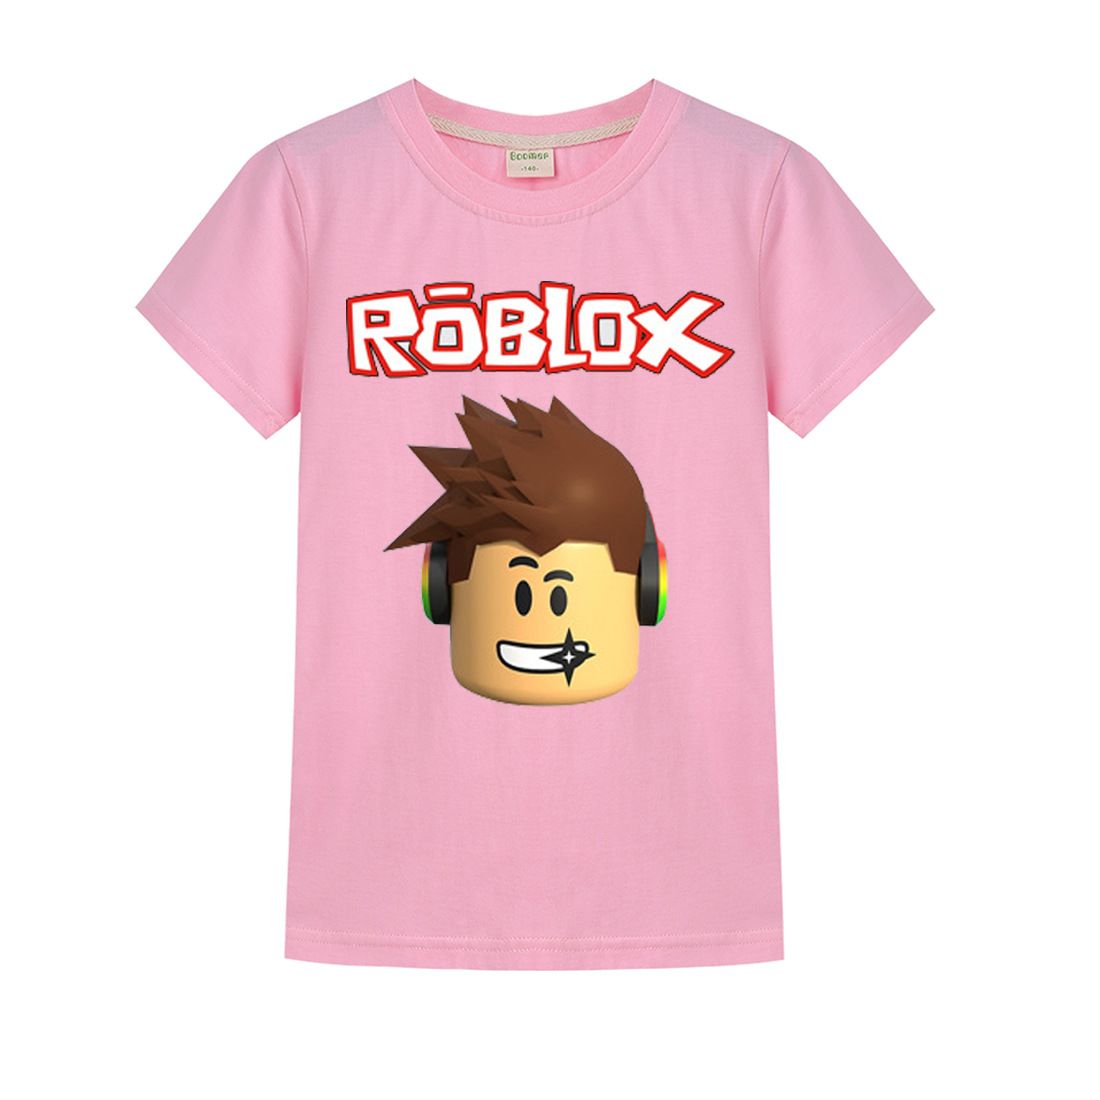 2020 2020 Summer Designer T Shirts For Girls Tops Roblox T Shirt Boys Clothing Cotton Short Sleeve Tshirt Toddler Tops 3 14 Years From Baby0512 13 77 Dhgate Com